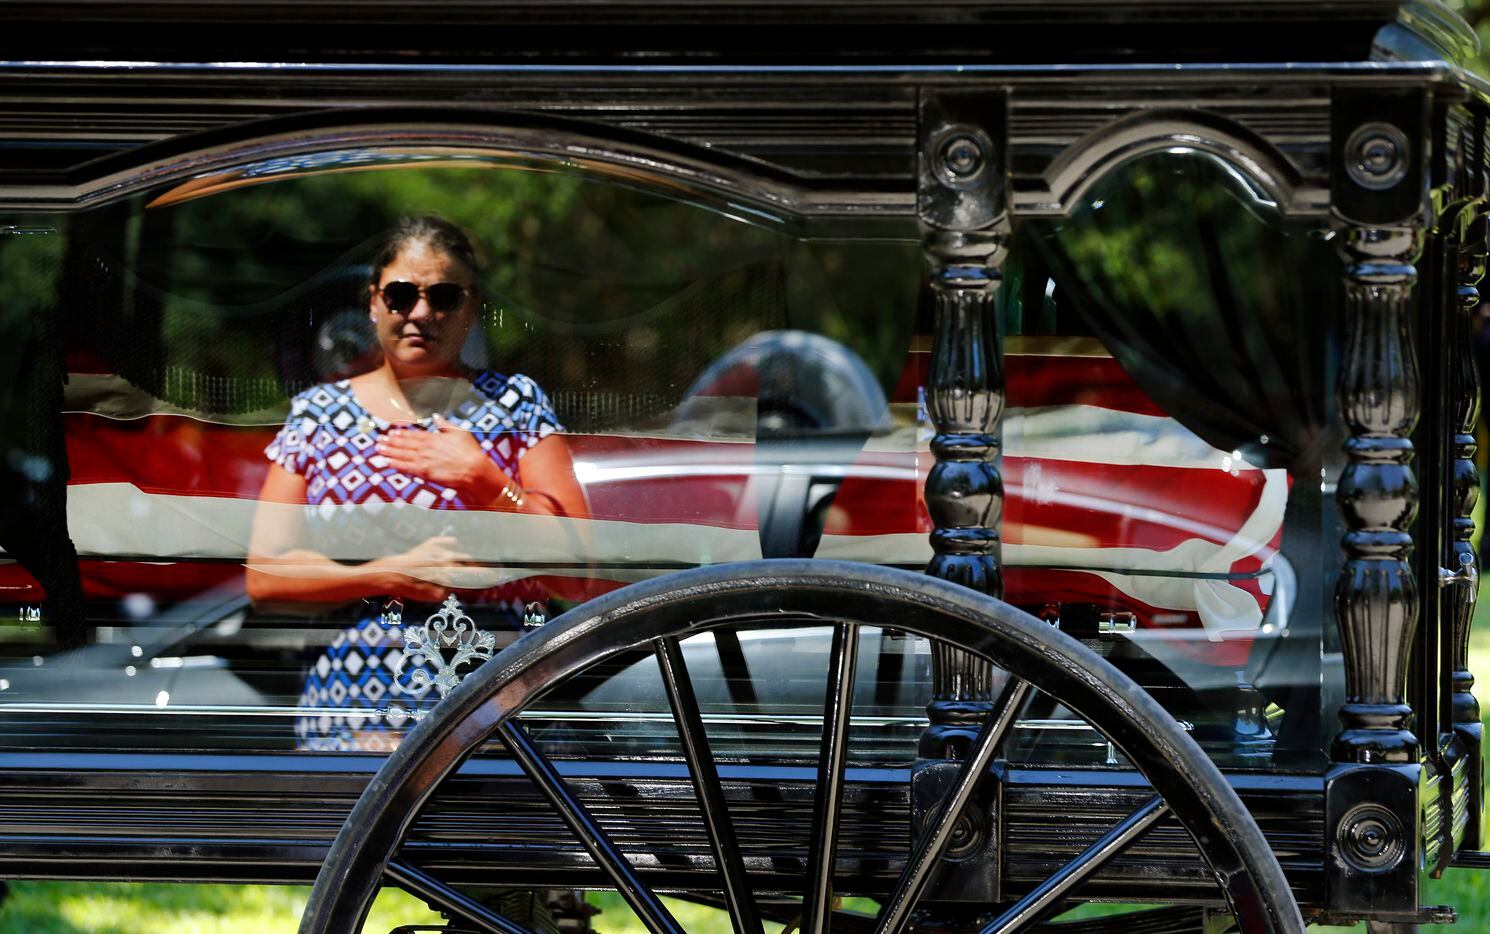 In the reflection of the horse-drawn caisson, a Smith family member places her hand over her...